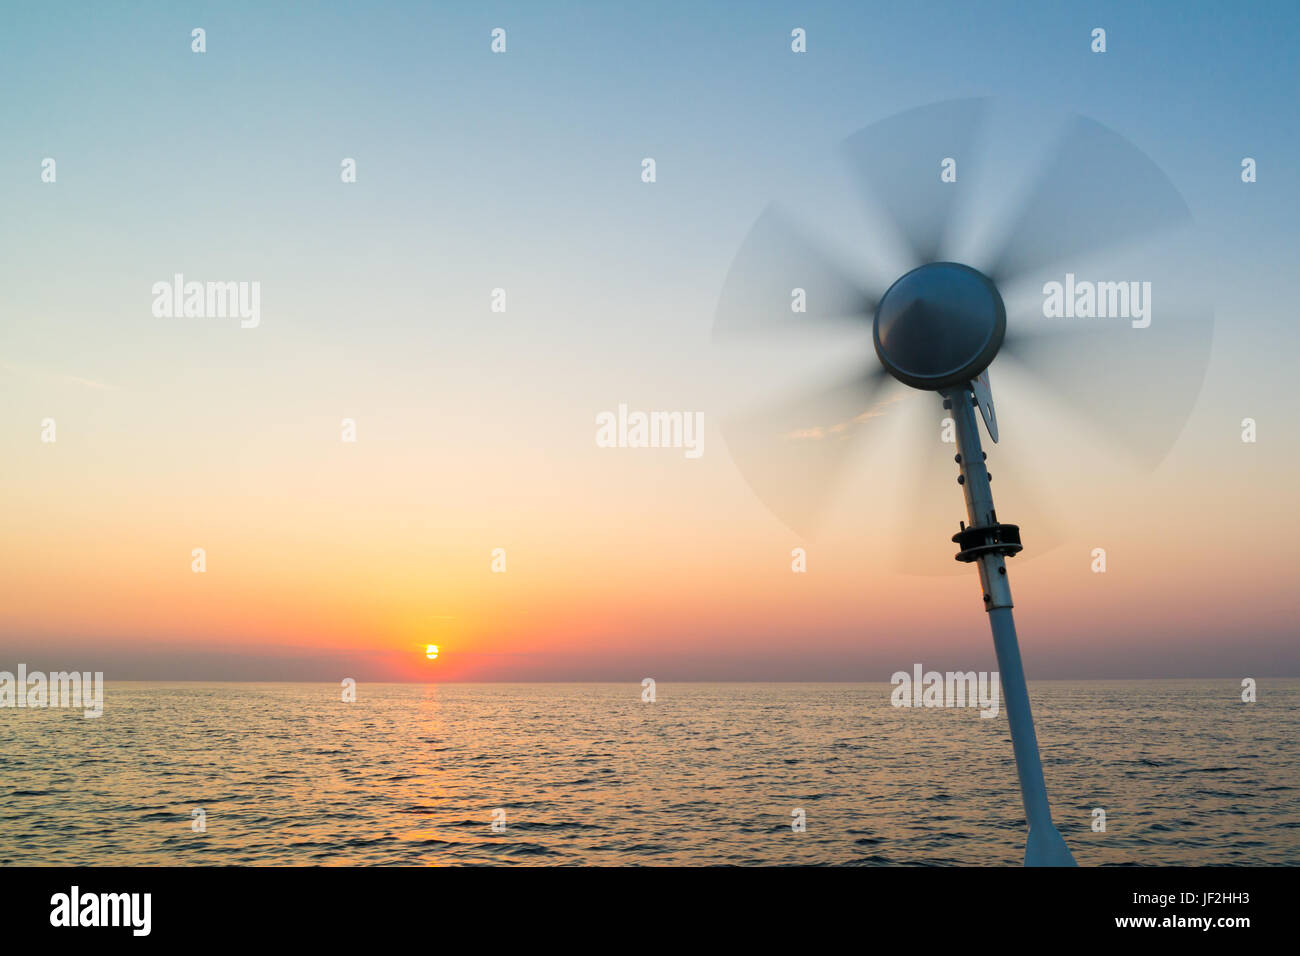 Marine wind turbine on sailing boat with turning blades using wind power to charge onboard batteries on North Sea at sunset, Netherlands Stock Photo